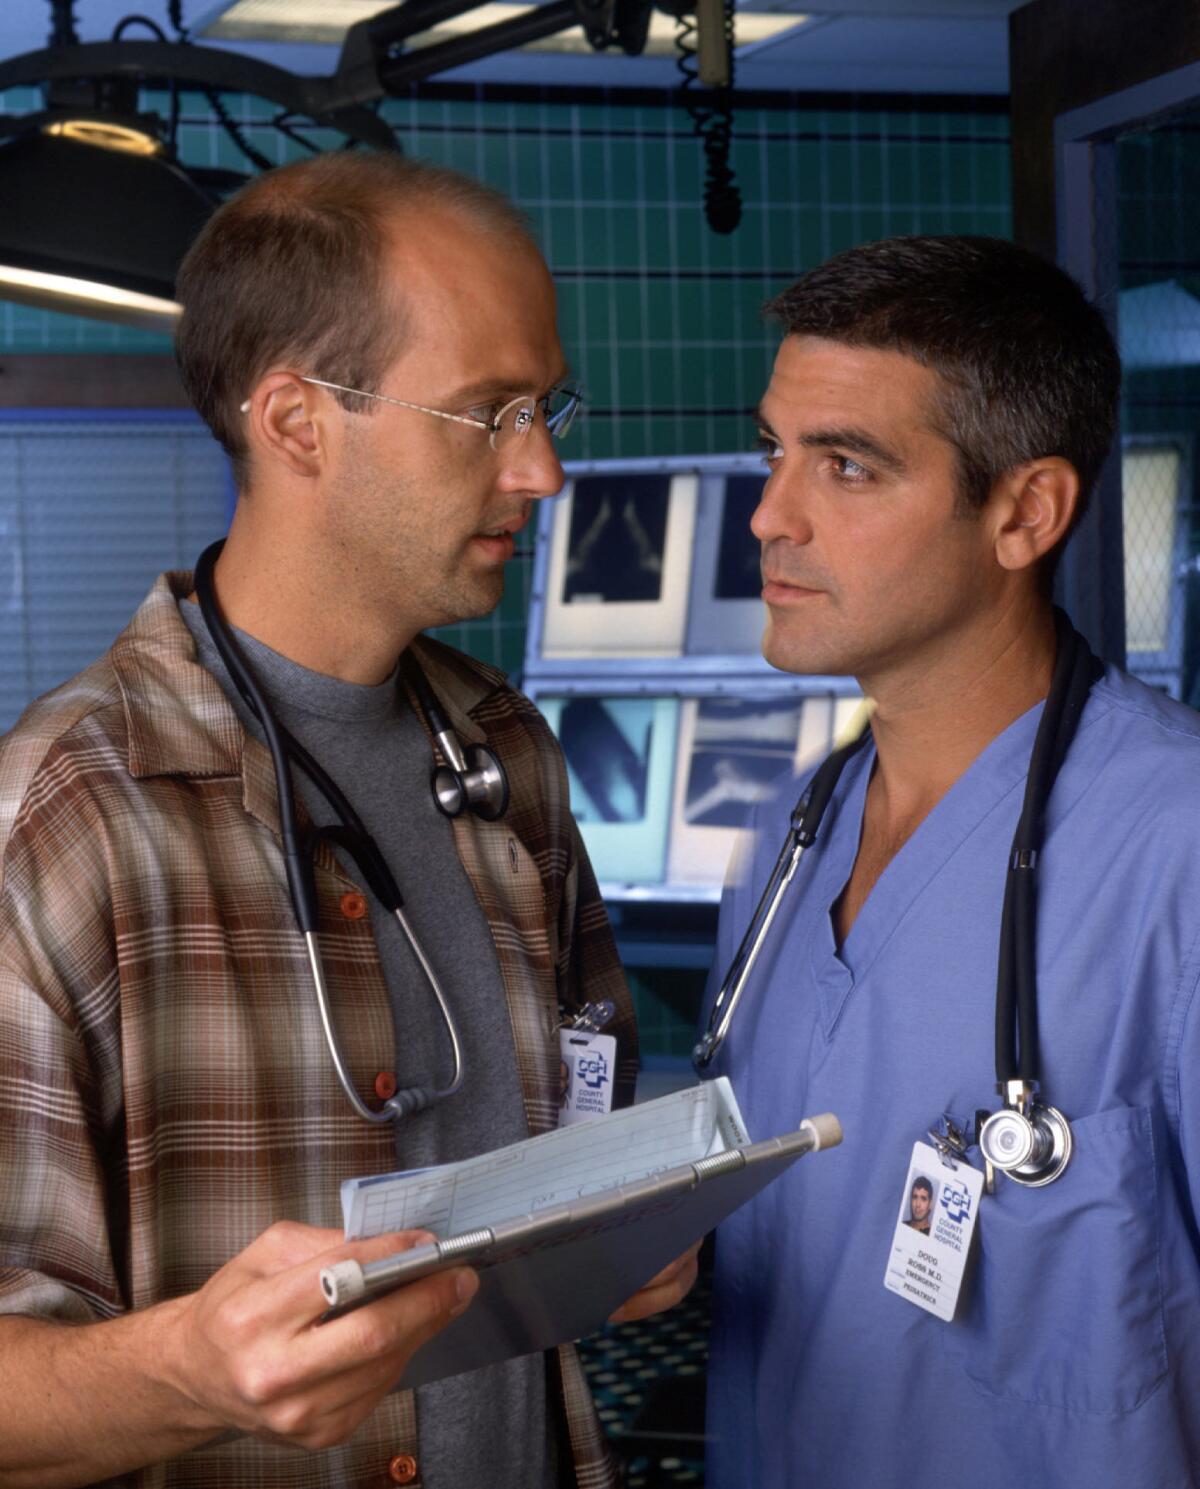 Two doctors look at each other during a consultation in a scene from TV series “ER”